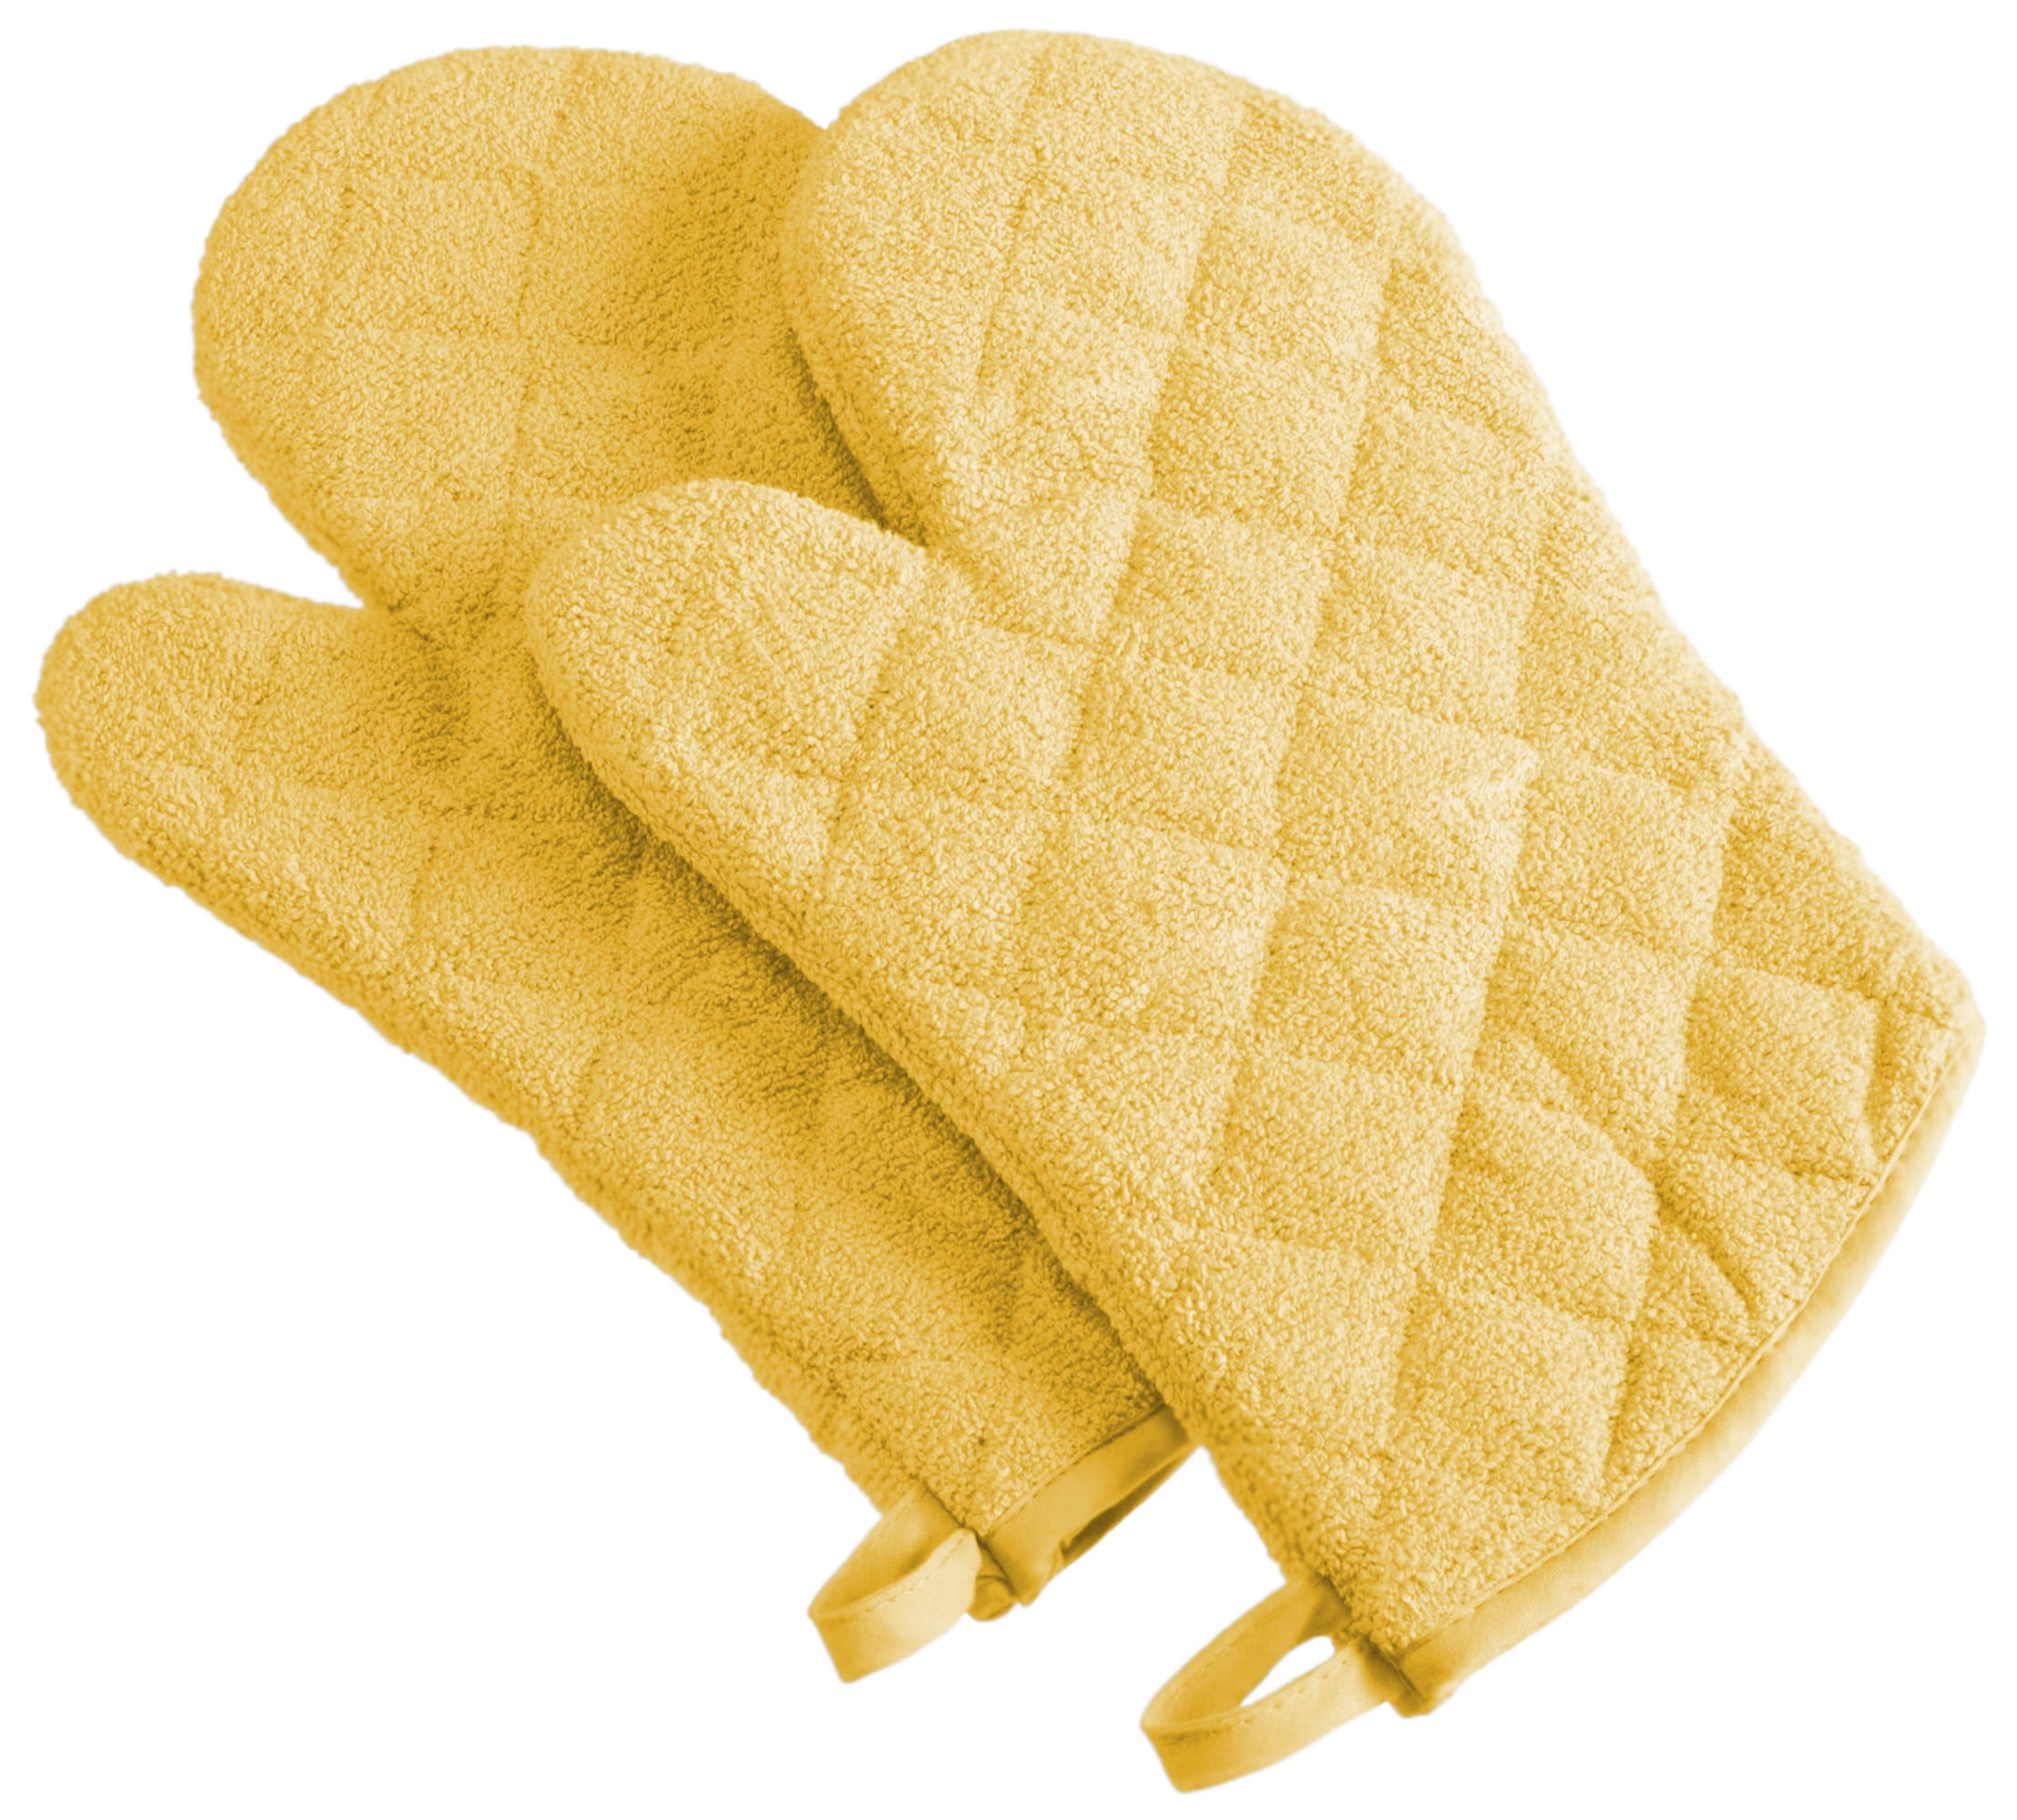 New Star Foodservice 32123 Terry Cloth Oven Mitts, Up to 400F, 13-Inch, Set  of 2